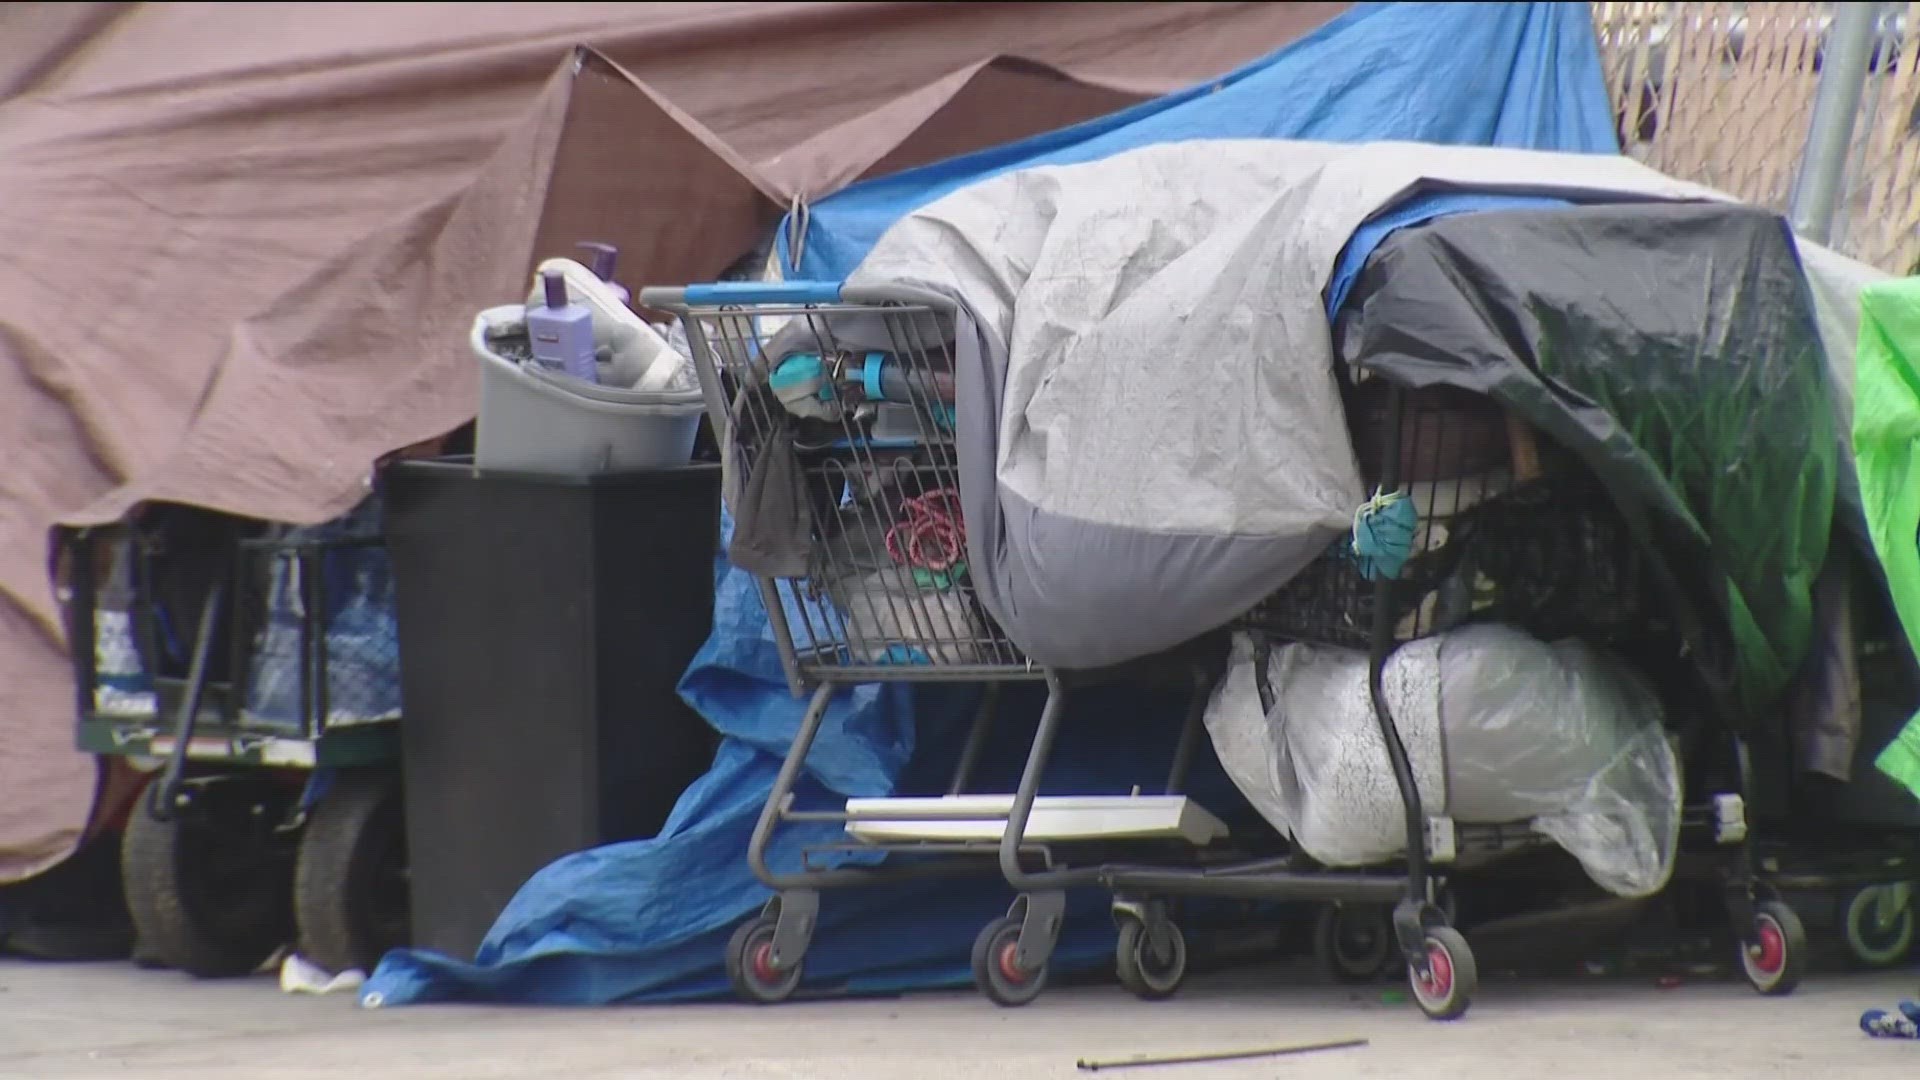 The ban would make it illegal to set up encampments near schools, open spaces, transit stops and sidewalks if shelter beds are available.